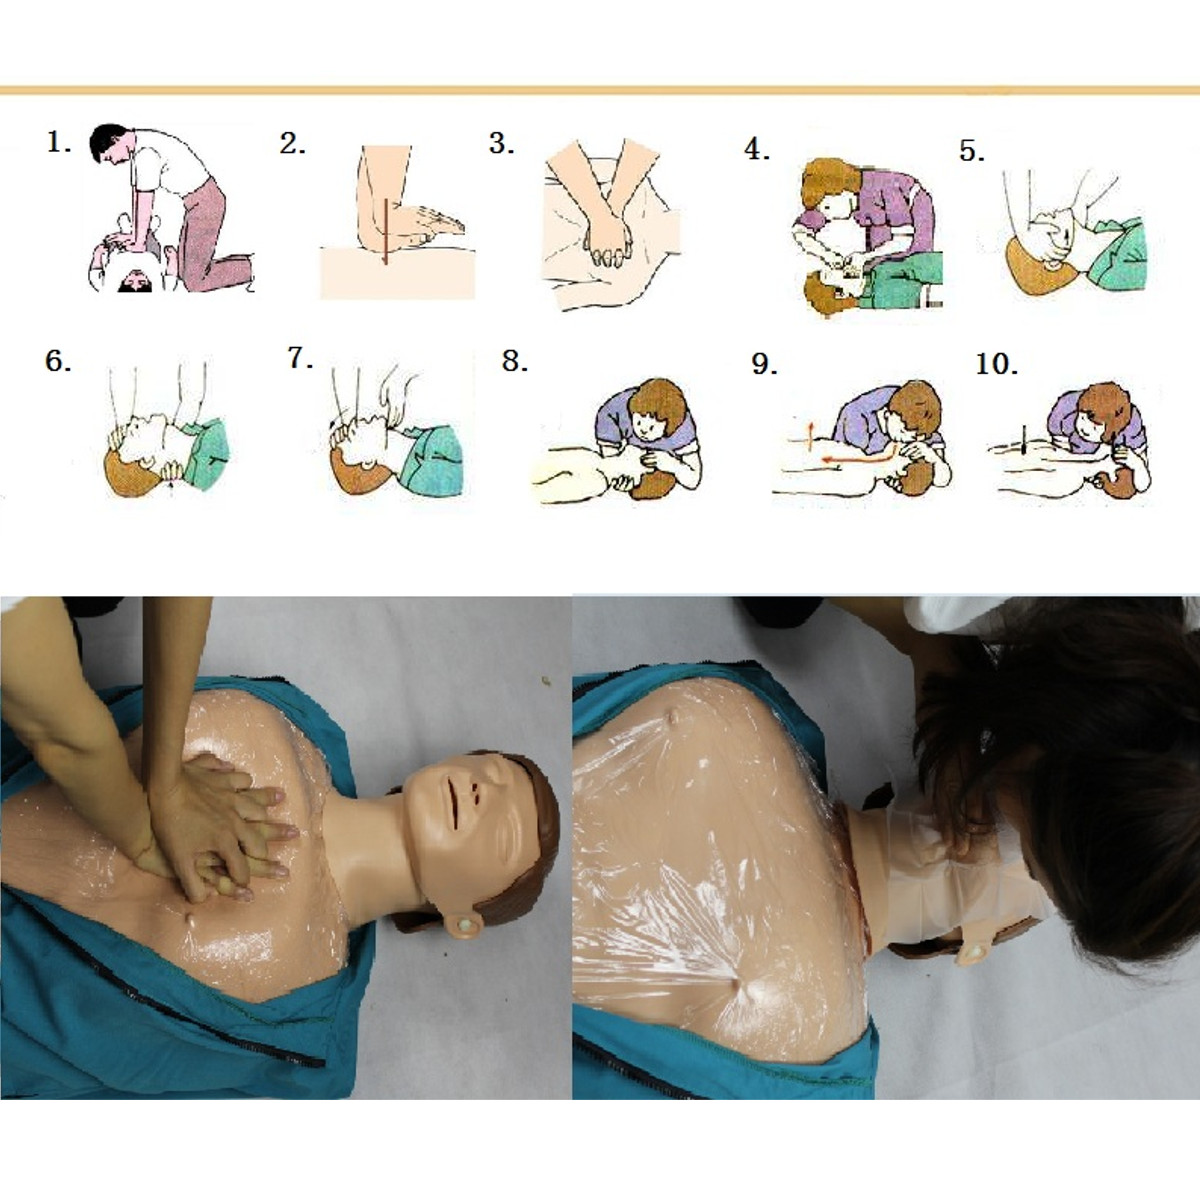 CPR Adult Manikin AED First Aid Training Dummy Training Medical Model Respiration Human 16